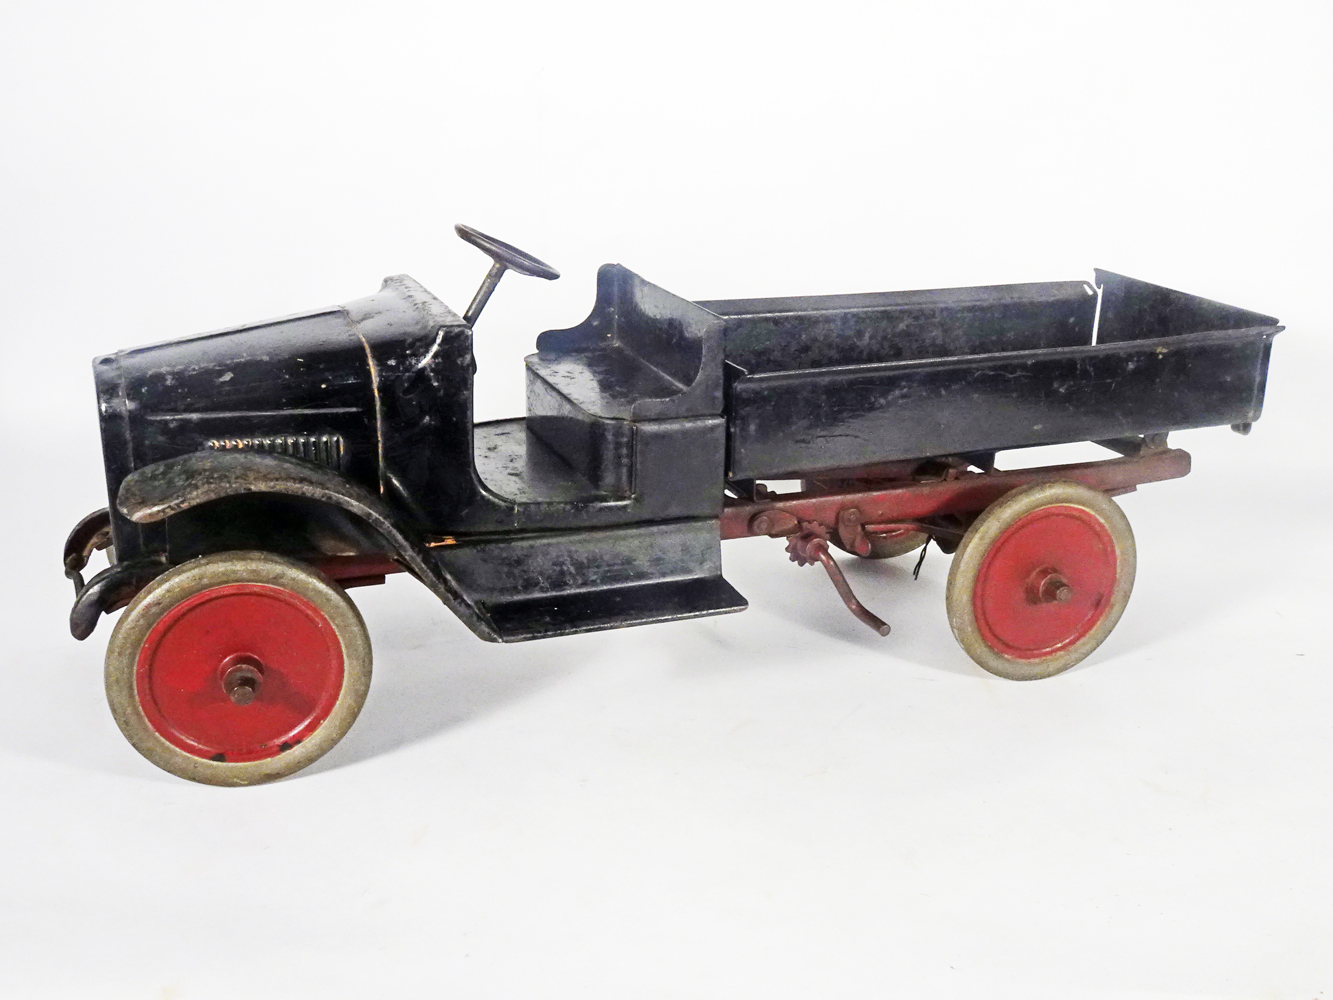 1920s Buddy L #201 ratchet dump truck, 25in long, manufactured between 1923-29. Est. $200-$400. Image courtesy of Stephenson’s Auction